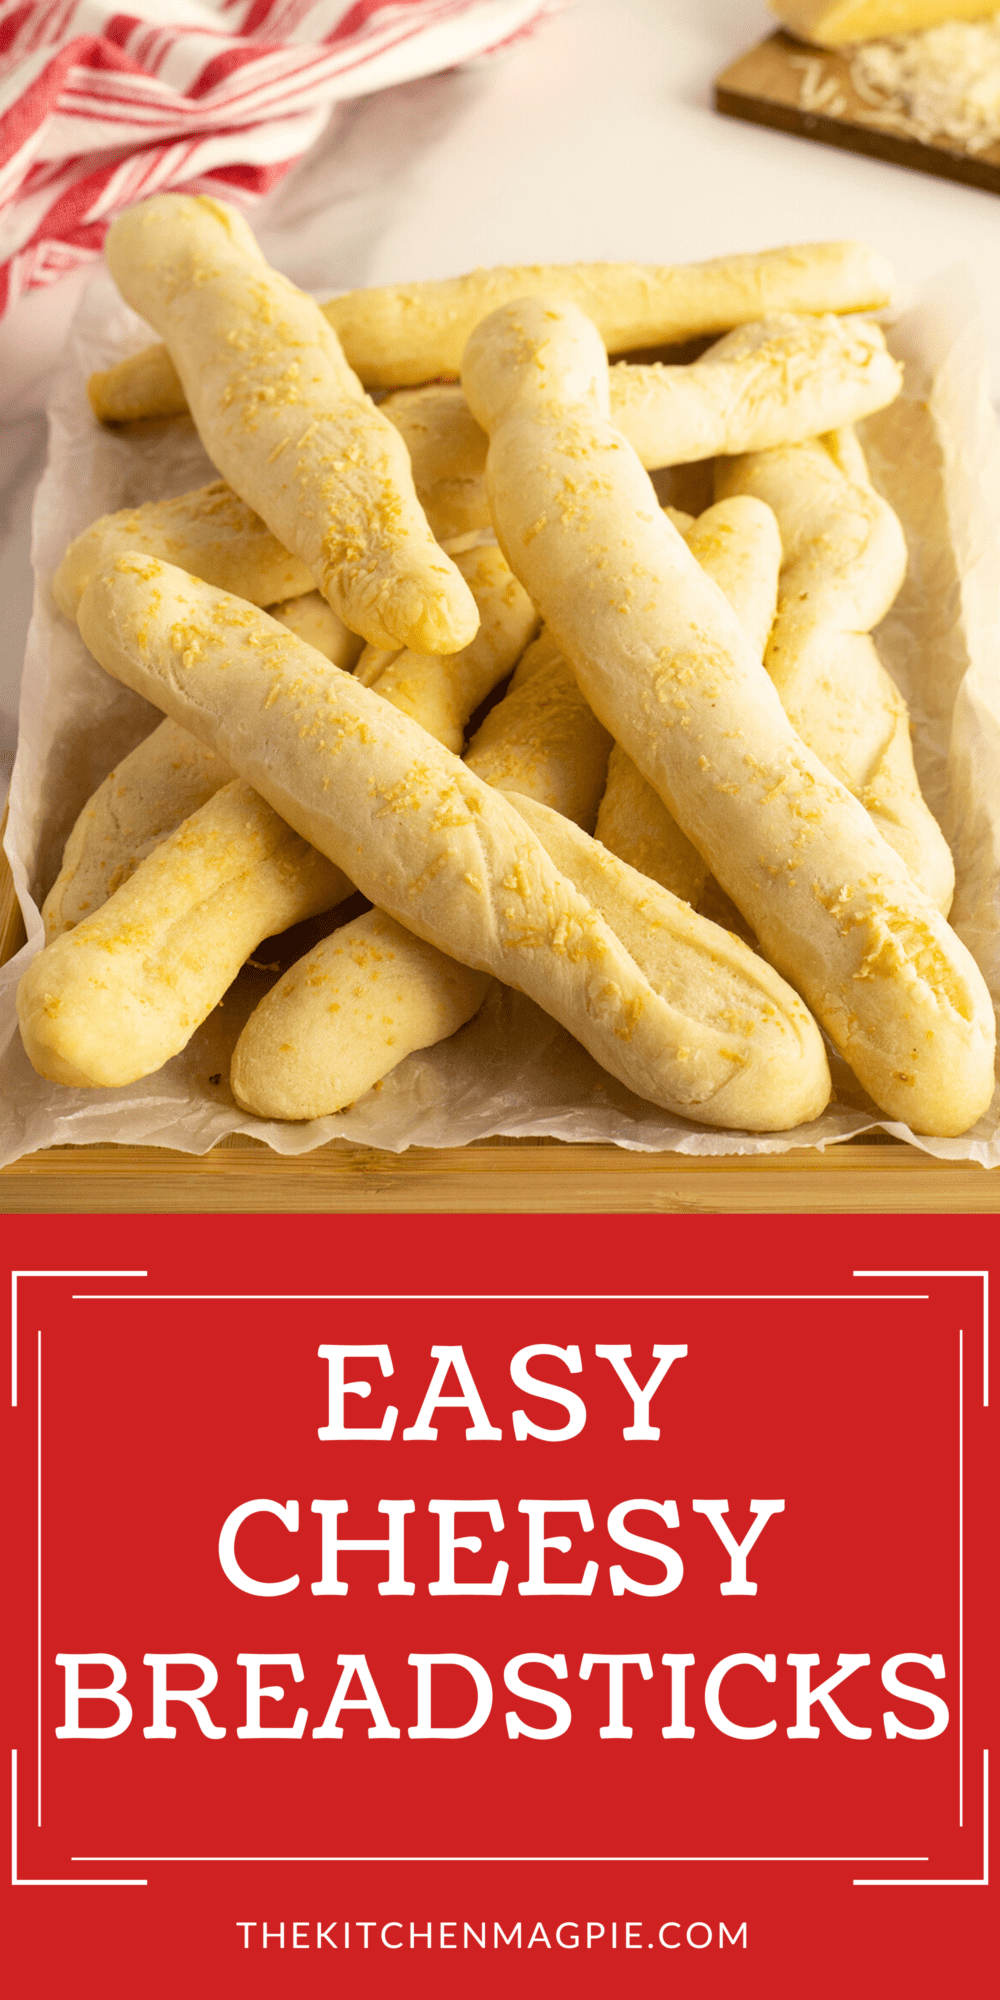 With a great recipe like this one, anyone can make some tasty and filling breadsticks as a side to a pasta dish, or as a light snack all on their own!